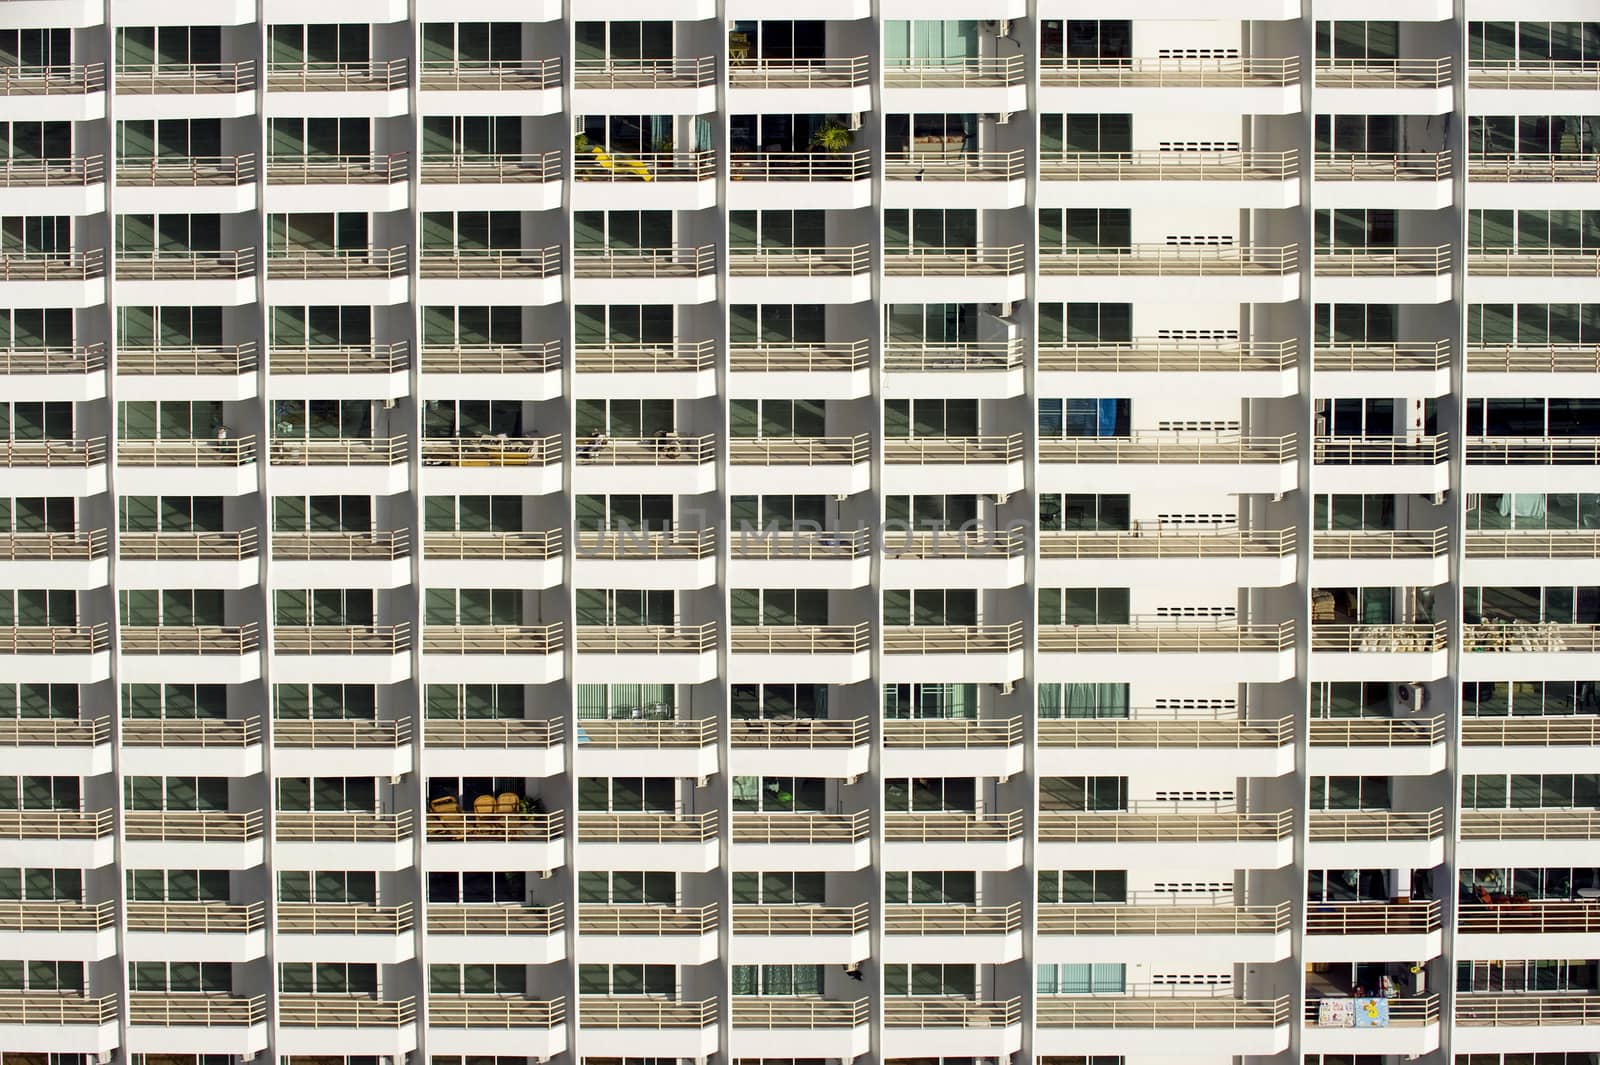 condominium - pattern / background by think4photop